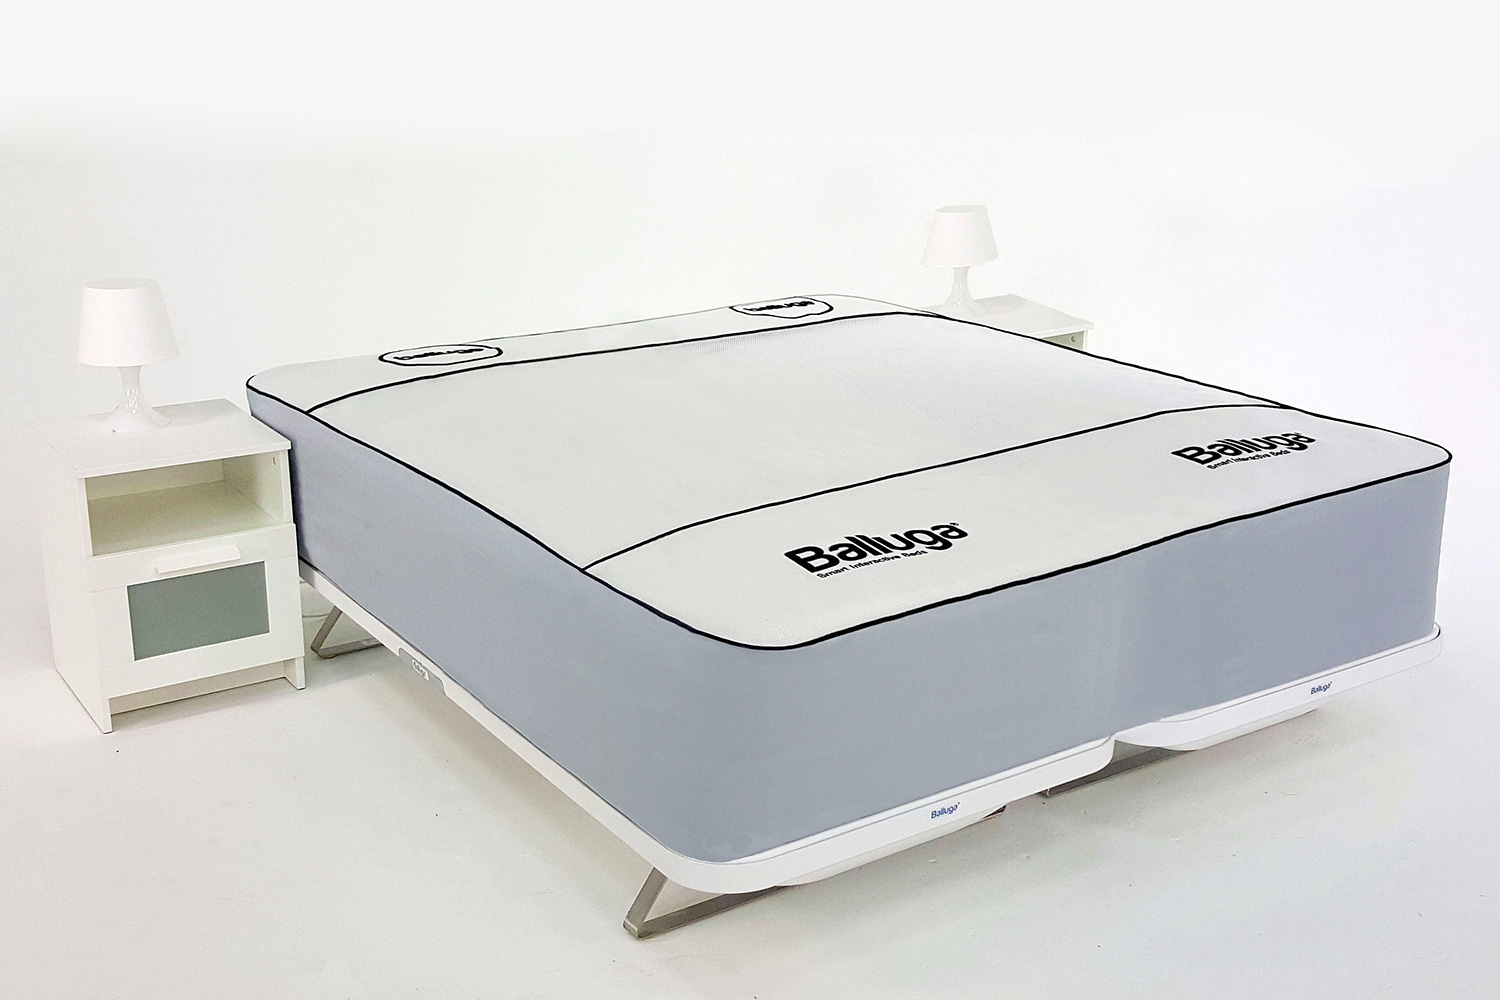 balluga is a smart bed with ac and air suspension double image